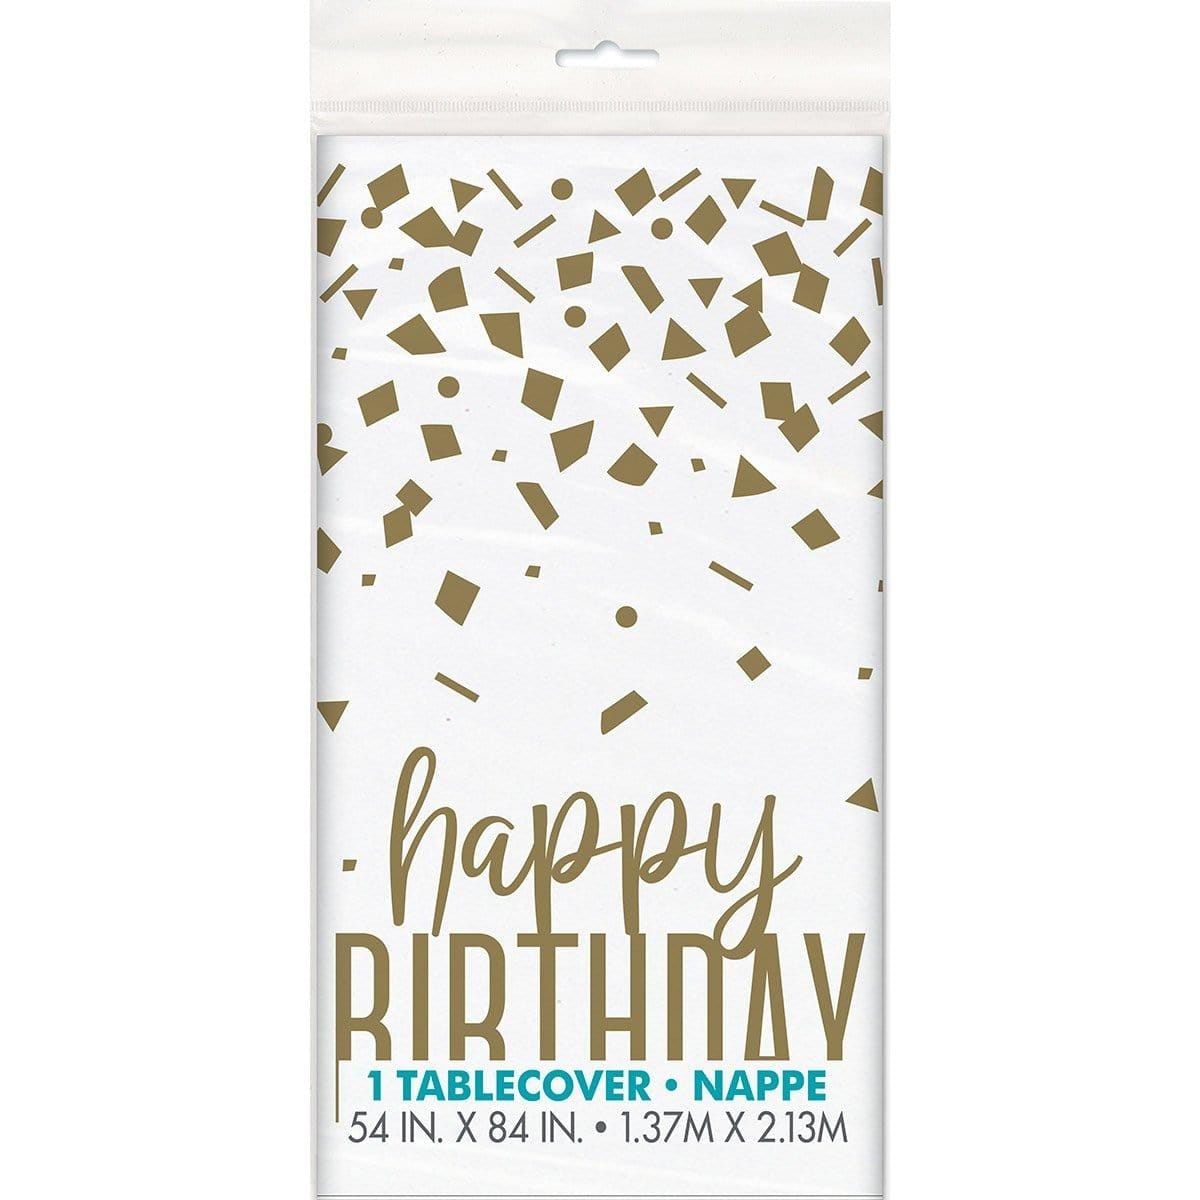 Buy General Birthday Gold Confetti Birthday Tablecover sold at Party Expert